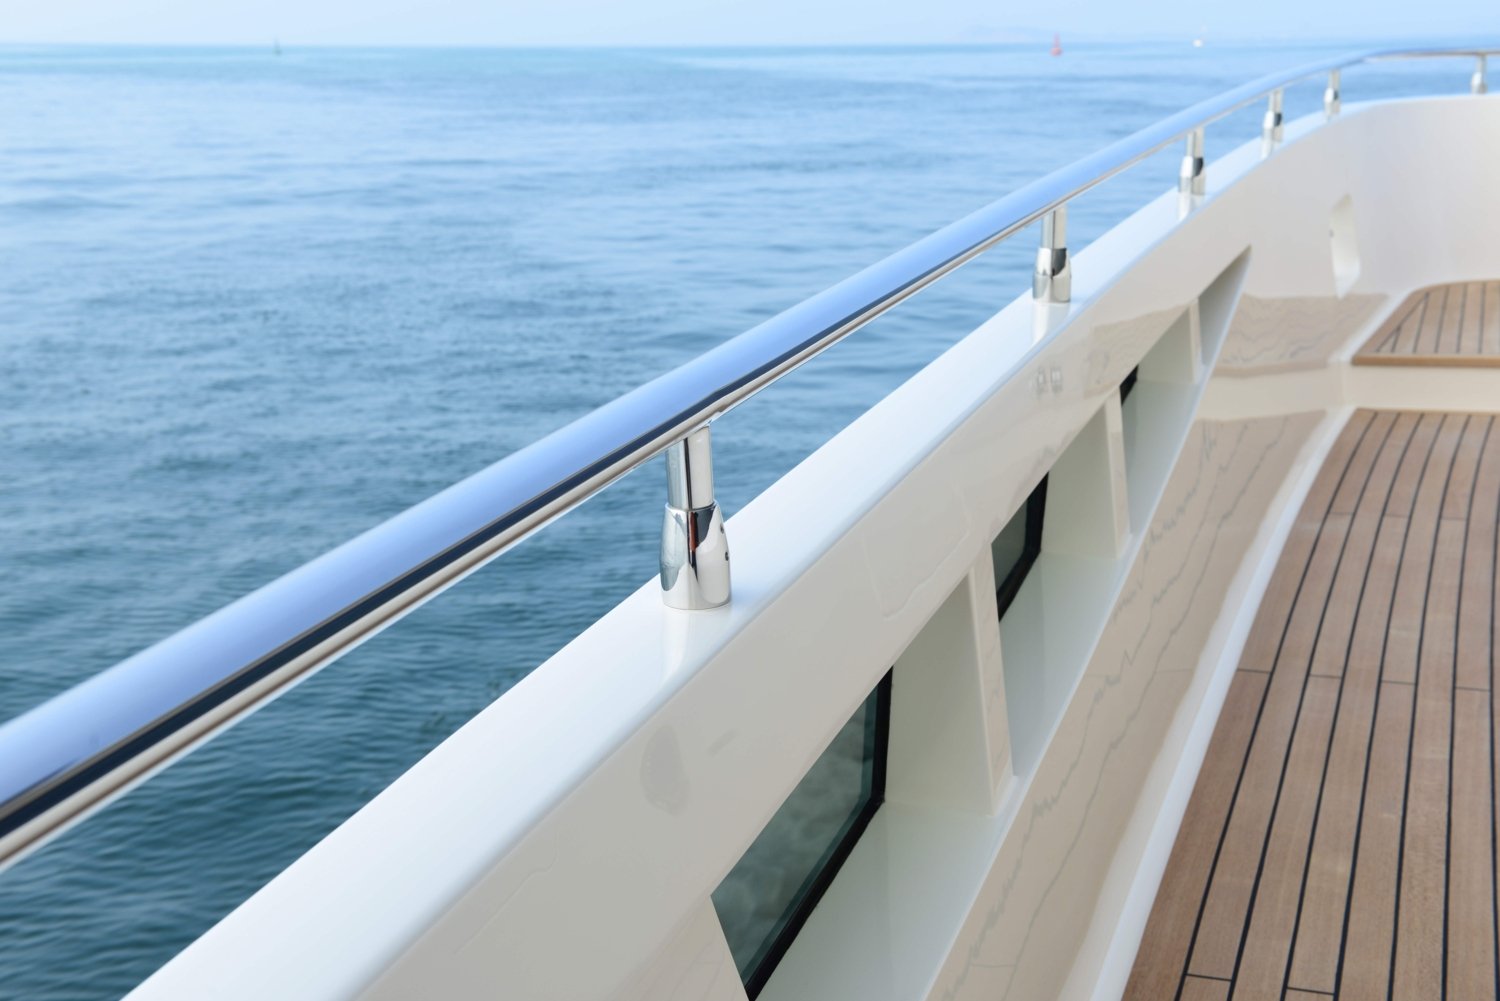 High-Gloss Finish of Stainless Steel Railings for Luxury Yachts